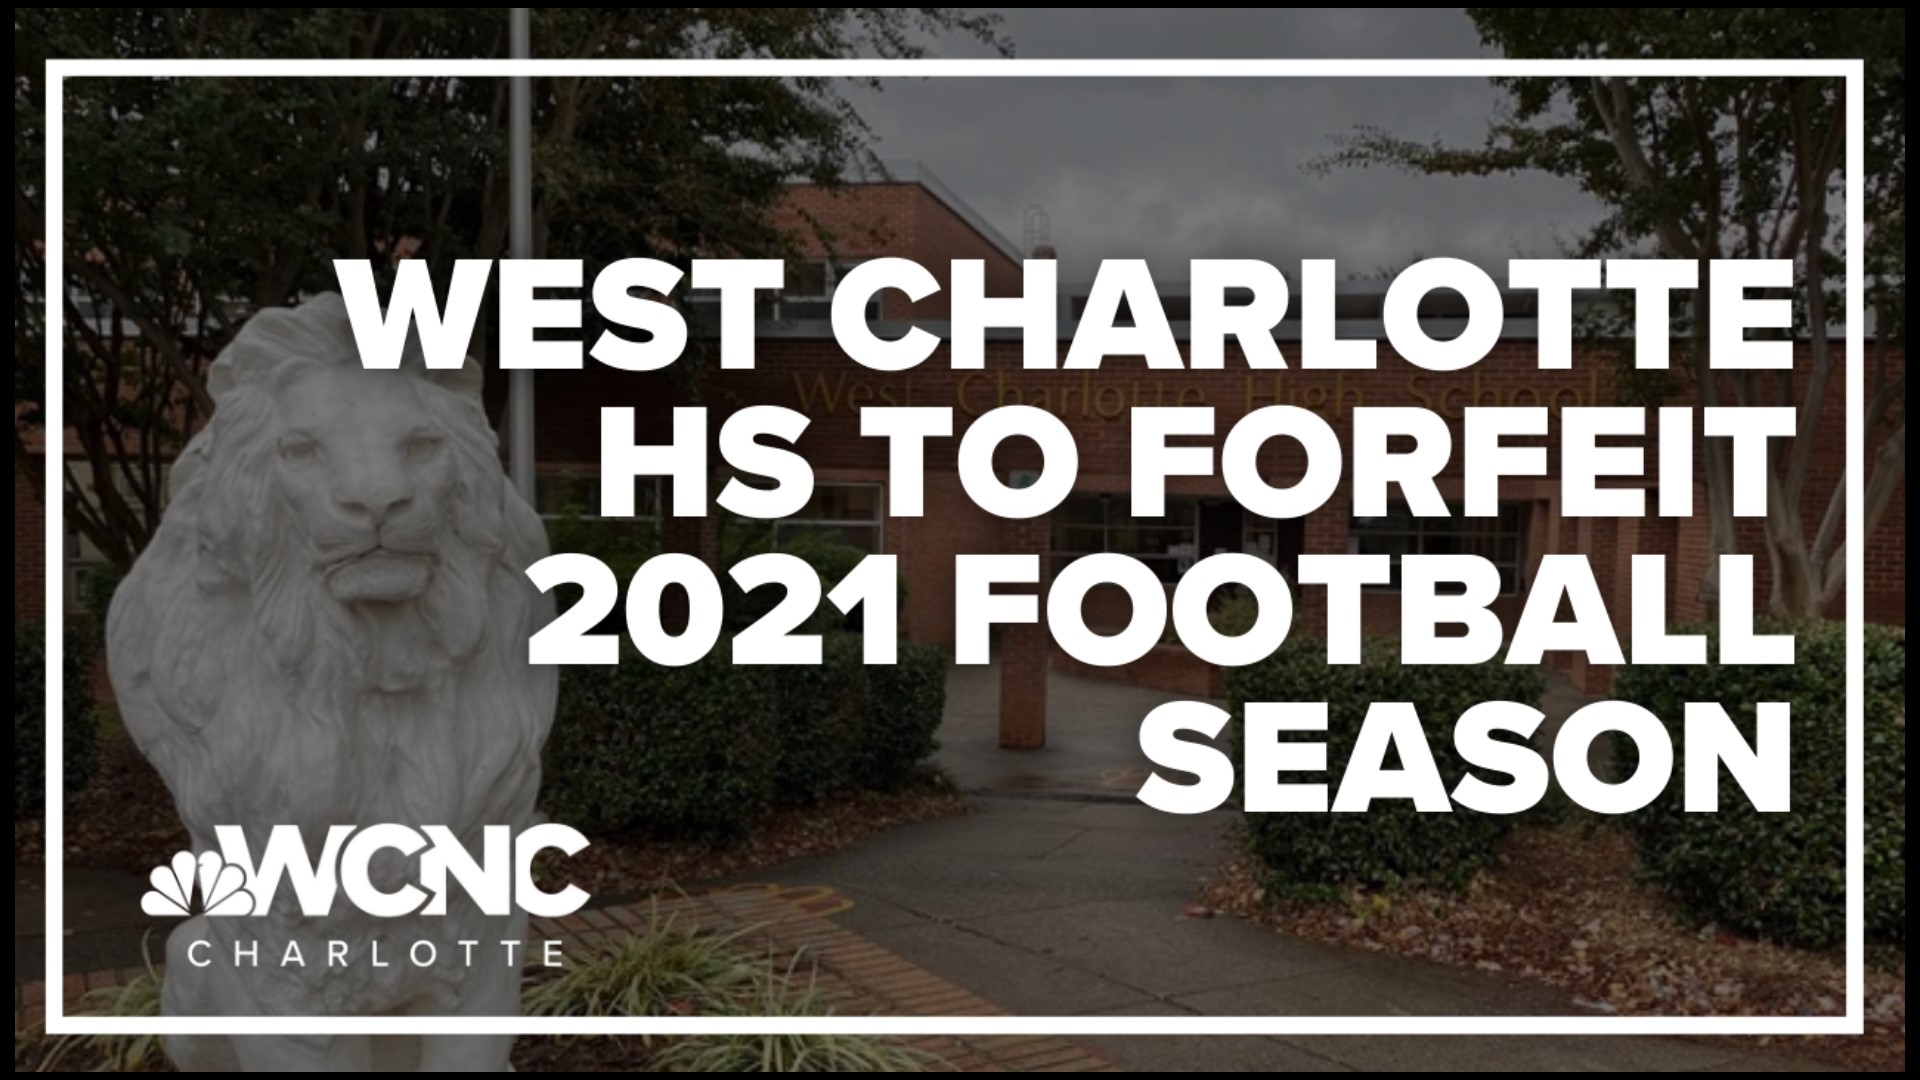 Charlotte-Mecklenburg Schools said it's because the school was made aware of a student/athlete who was ineligible for the 2021-2022 football season.